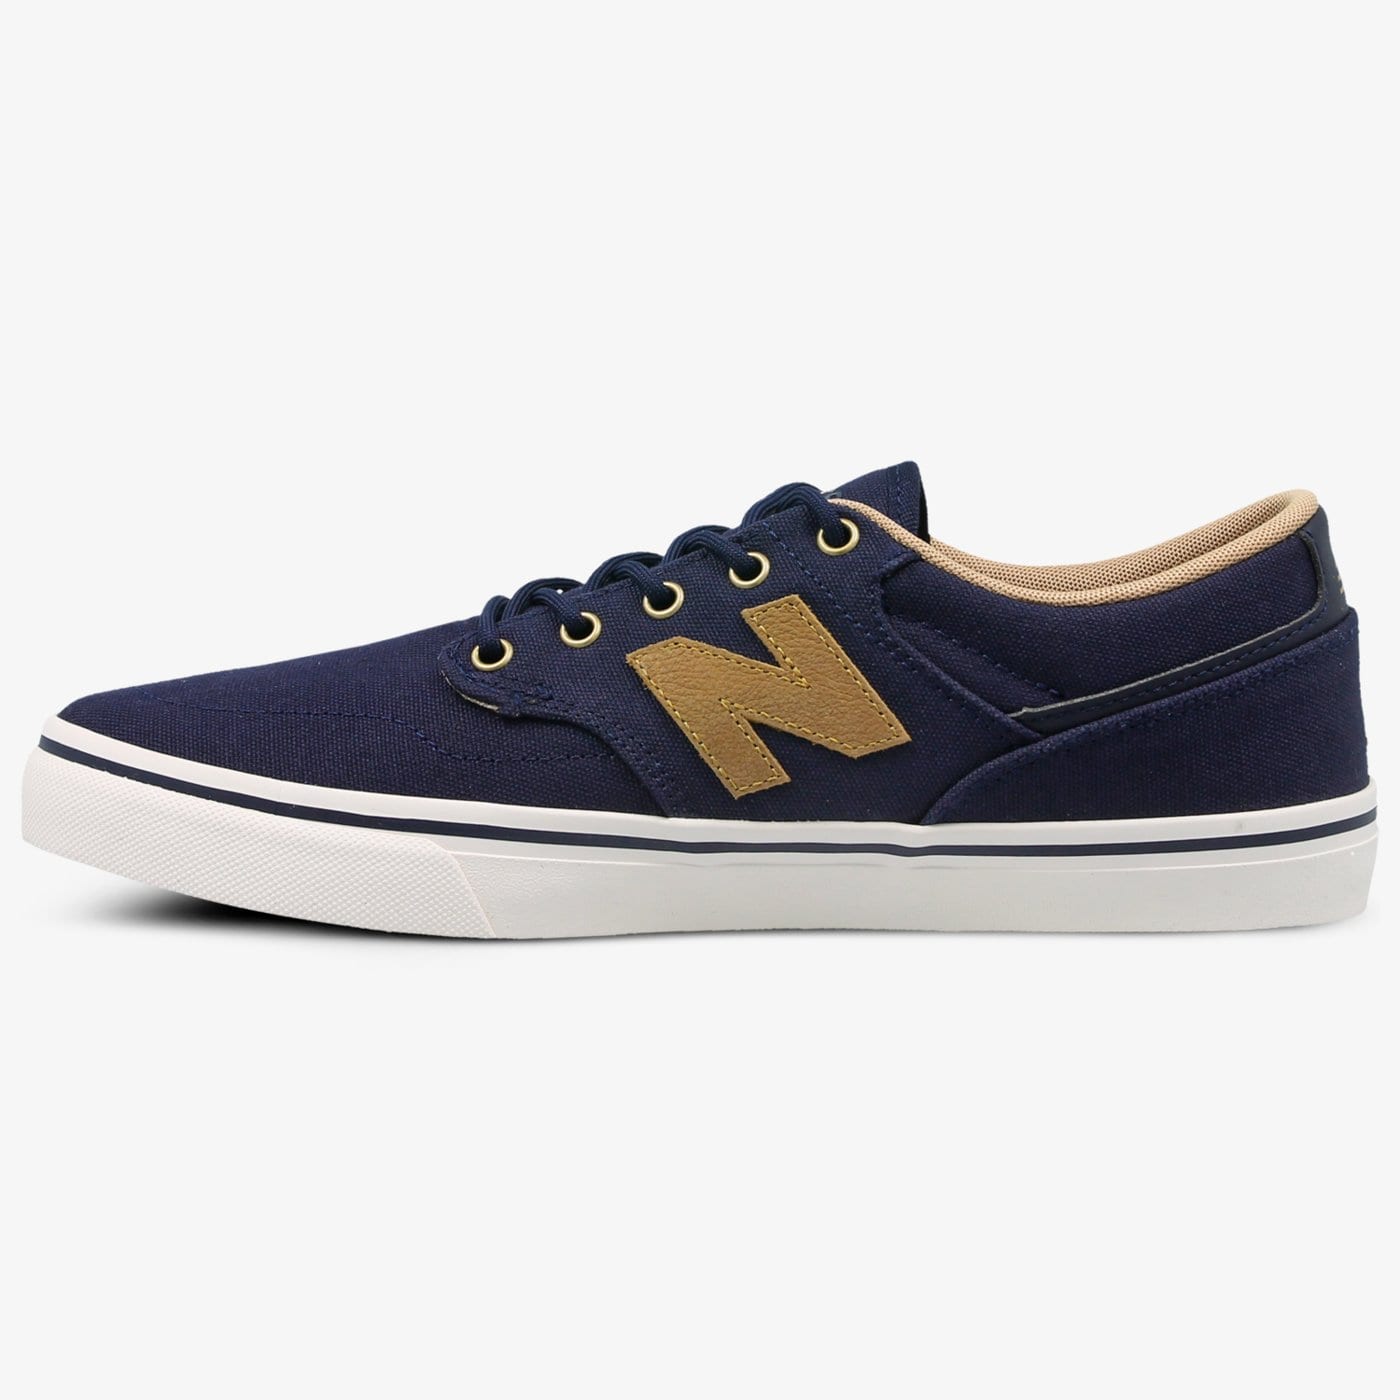 New 331/Navy/White - Midway Surf